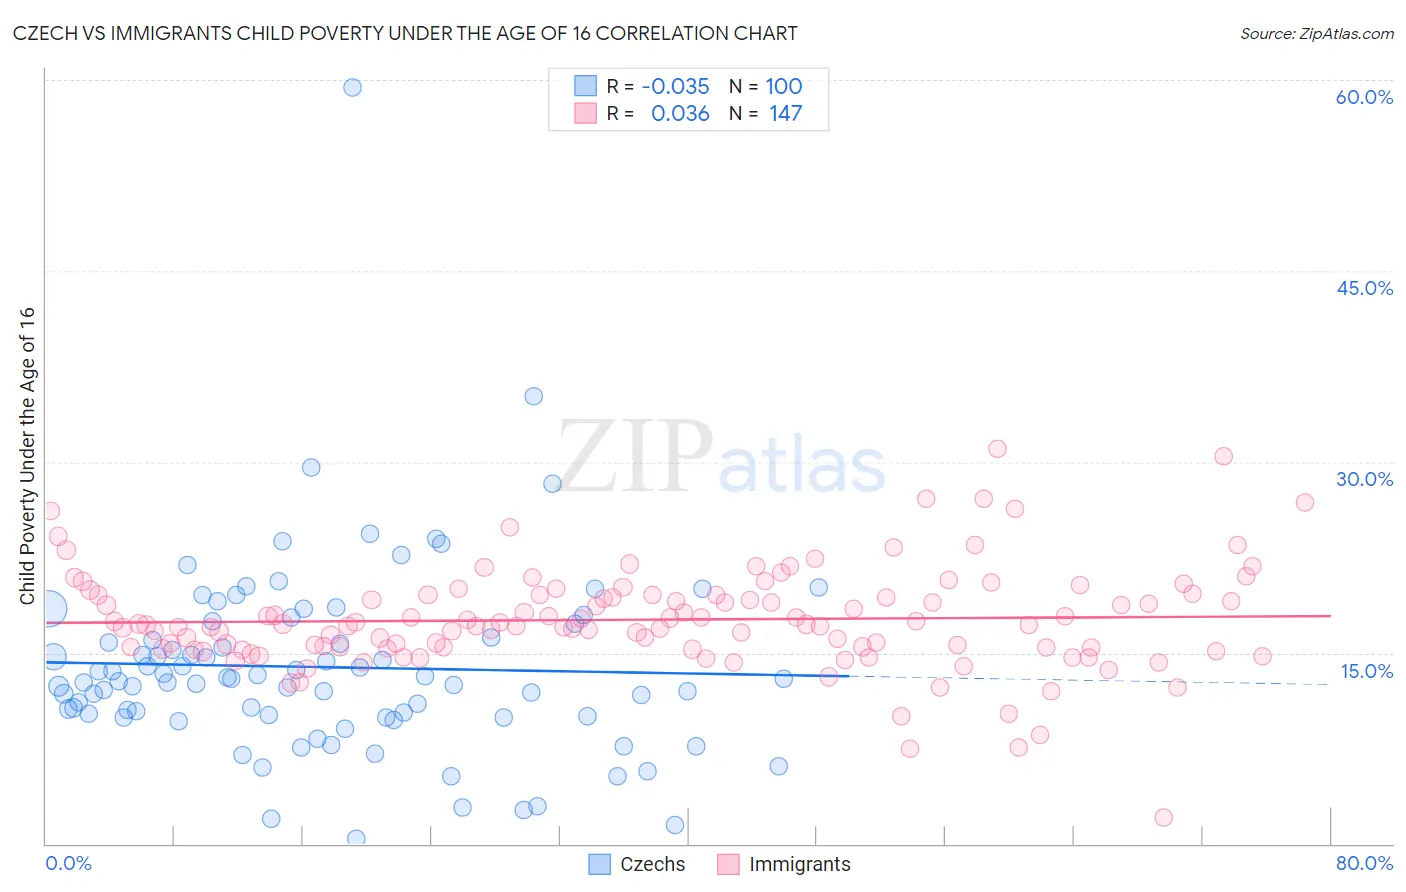 Czech vs Immigrants Child Poverty Under the Age of 16